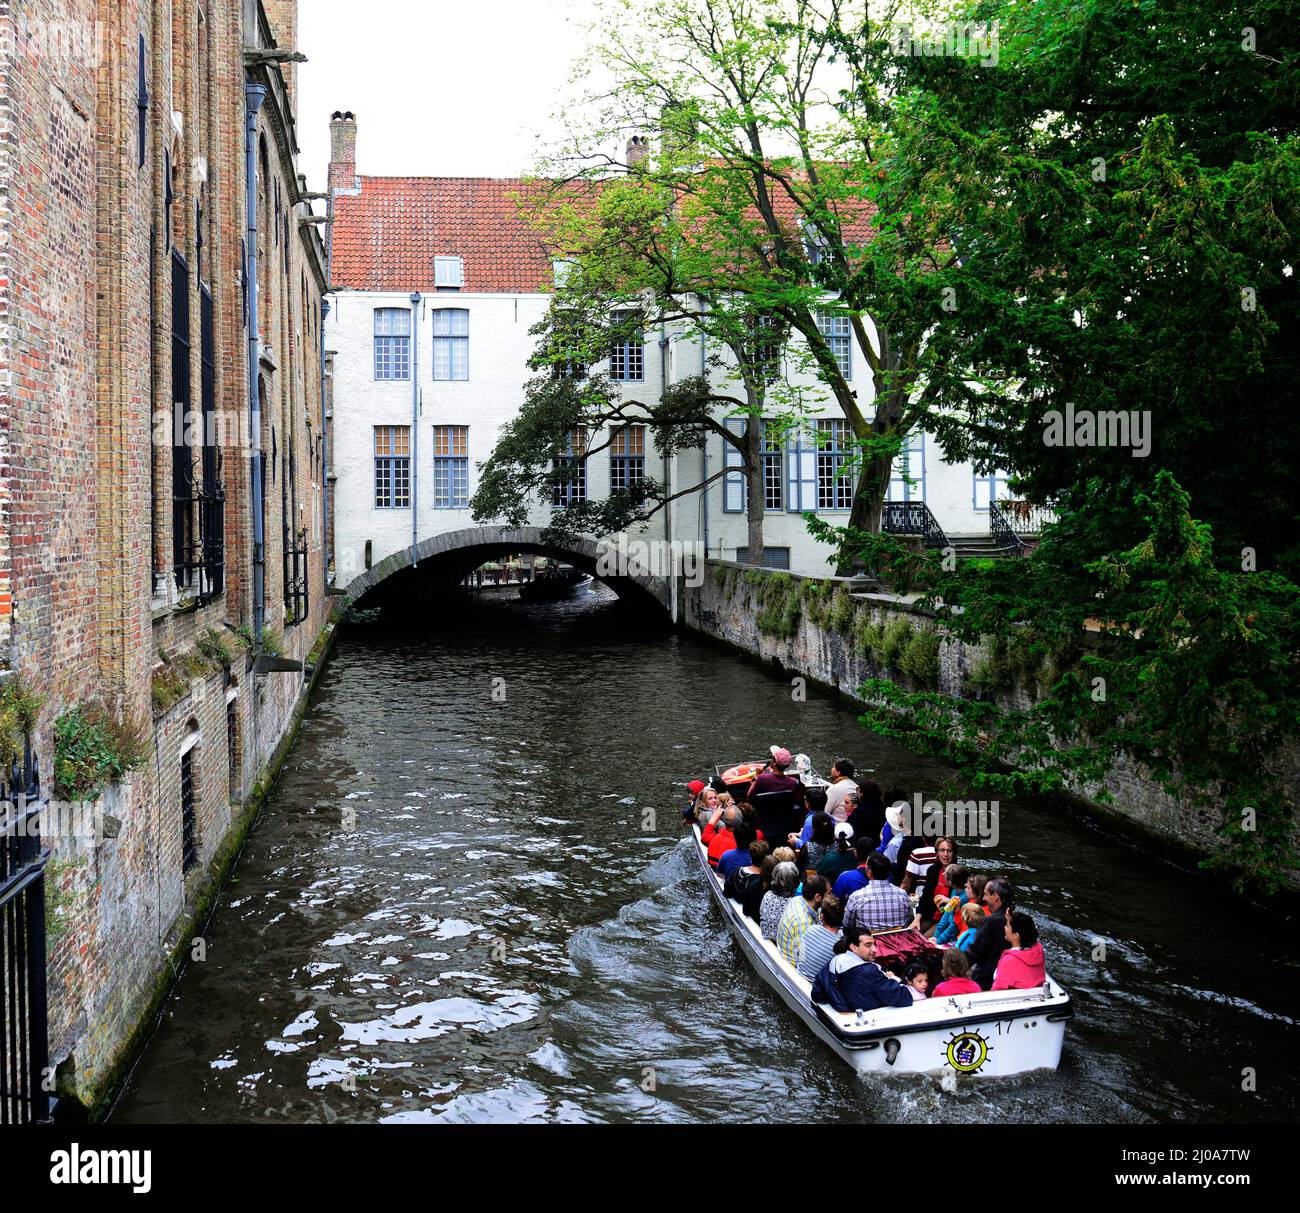 Tourist boats on an inner canal boat trip in Bruges, Belgium. Stock Photo